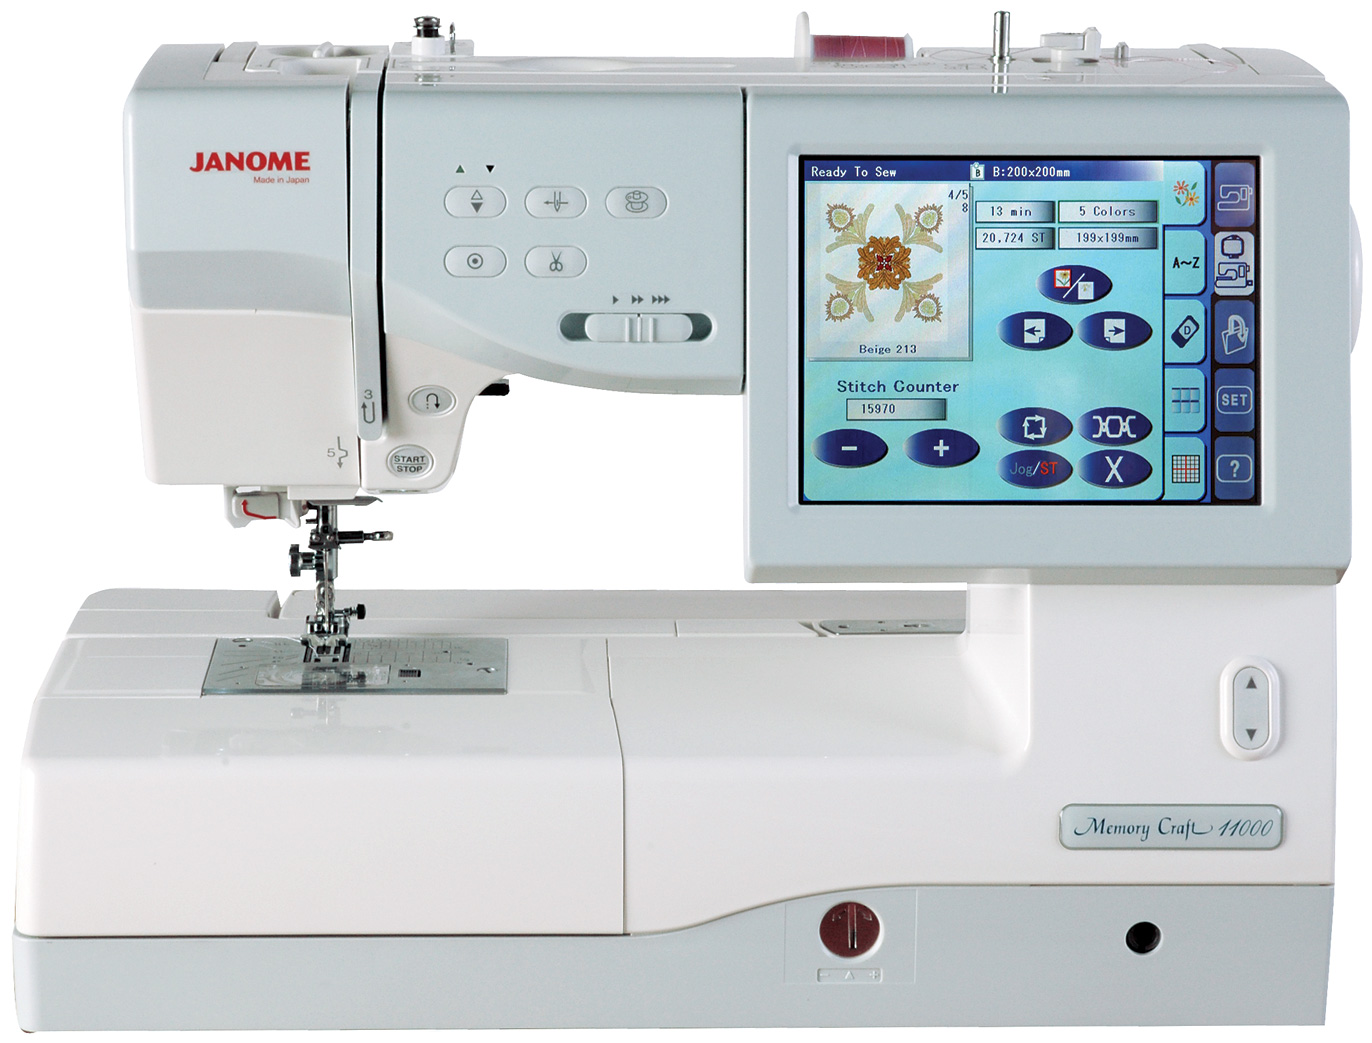 Sewing Machines &amp; Embroidery Machinery - Sewing Machine Reviews